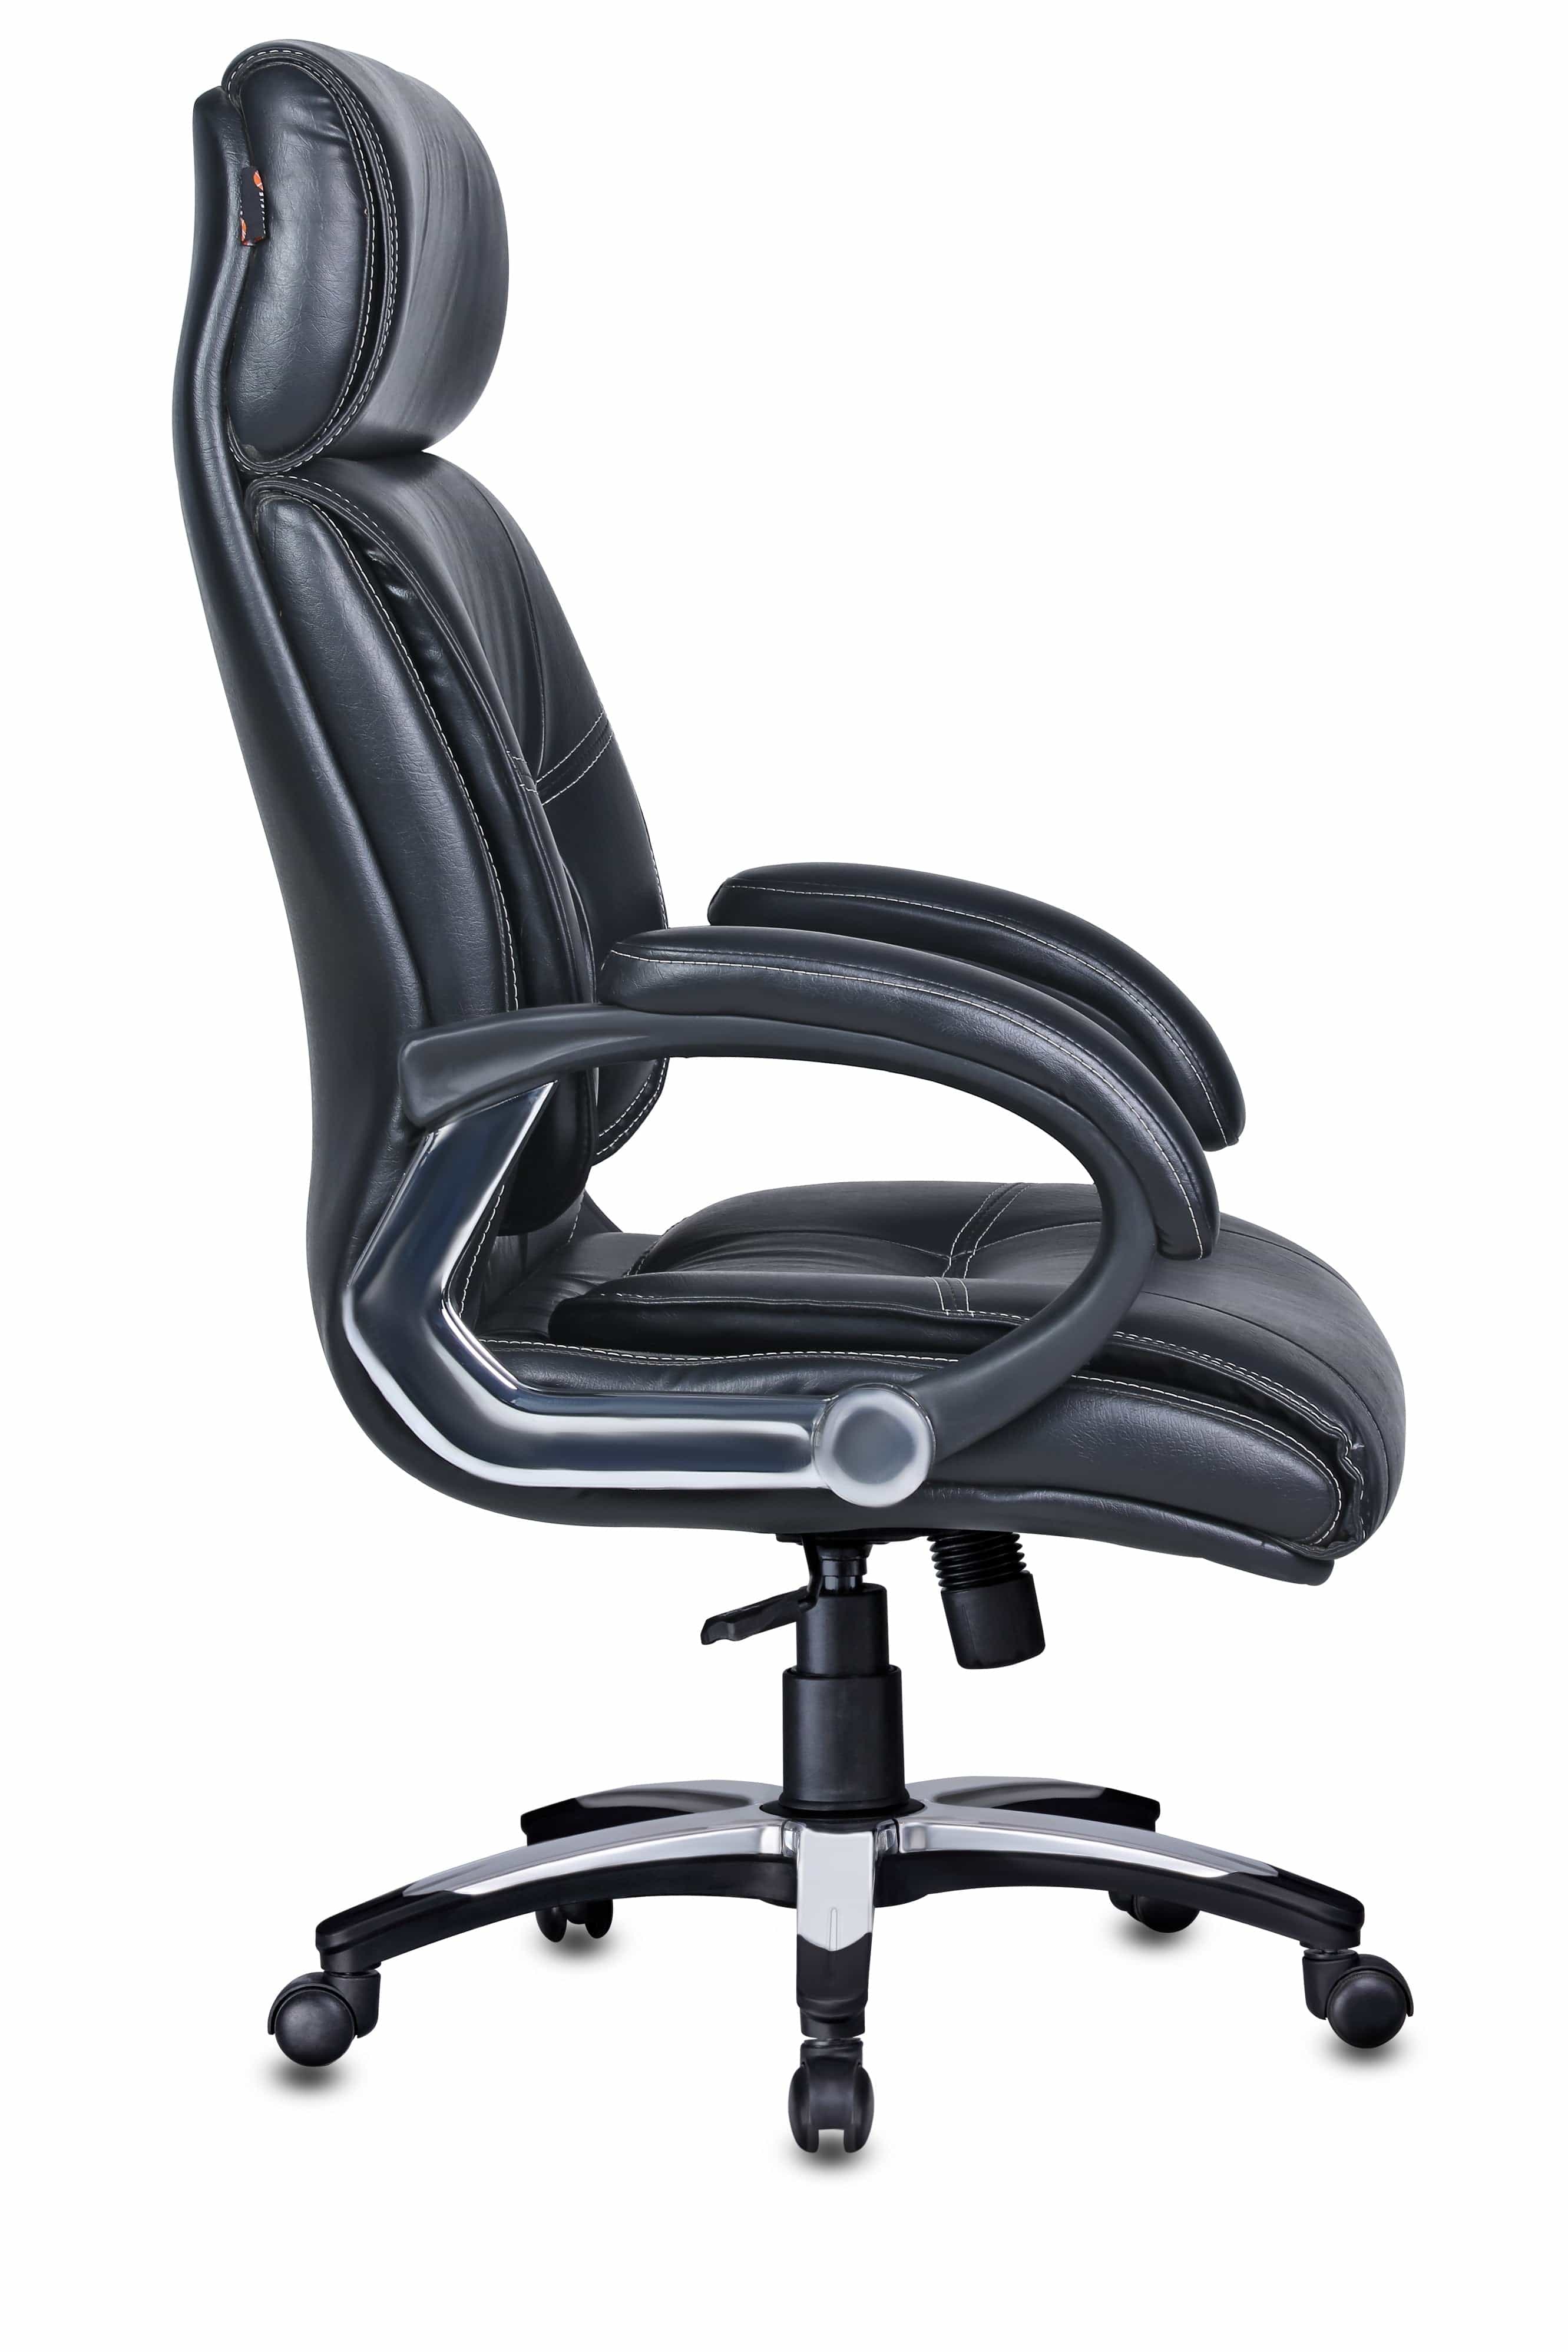 Elegant Executive Chair in Black Colour by Adiko Systems